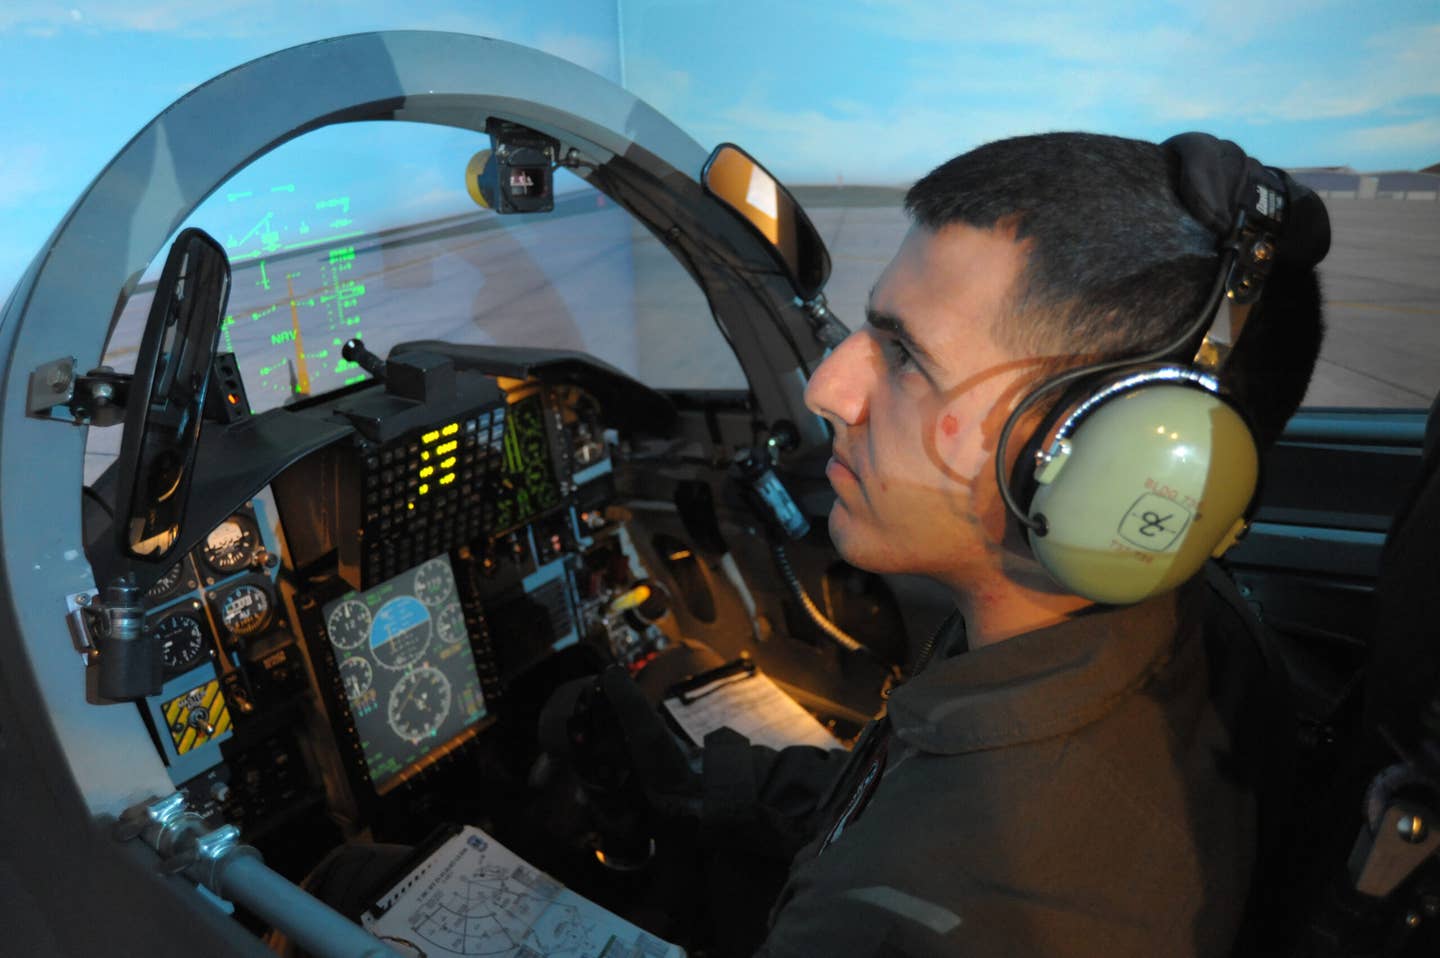 A U.S. Air Force student trains on a T-38 simulator at Joint Base San Antonio-Randolph, Texas. <em>U.S. Air Force photo by Joel Martinez/Released</em>